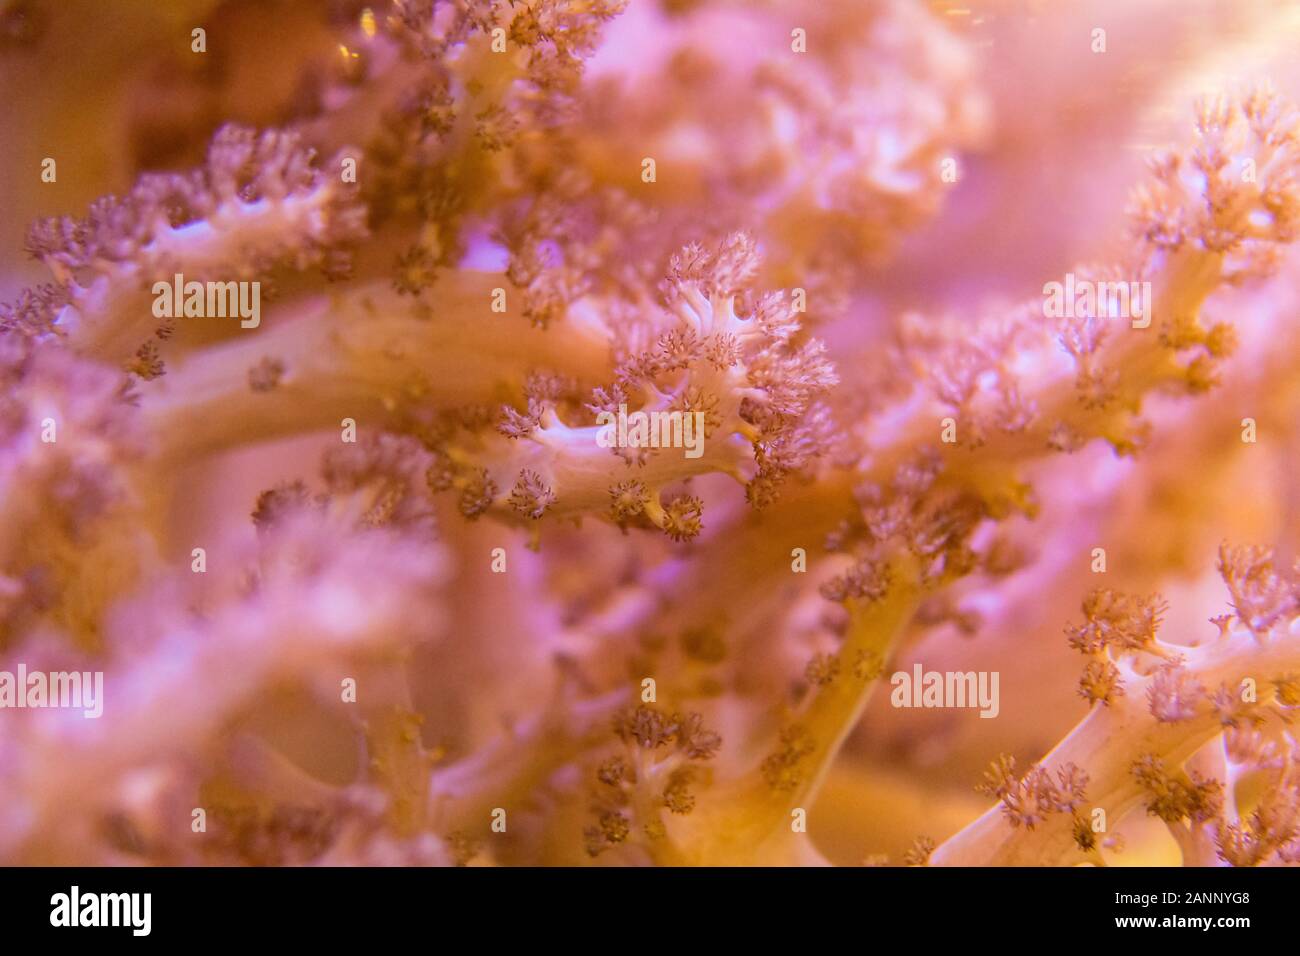 Living corals are very close AS A BACKGROUND Stock Photo